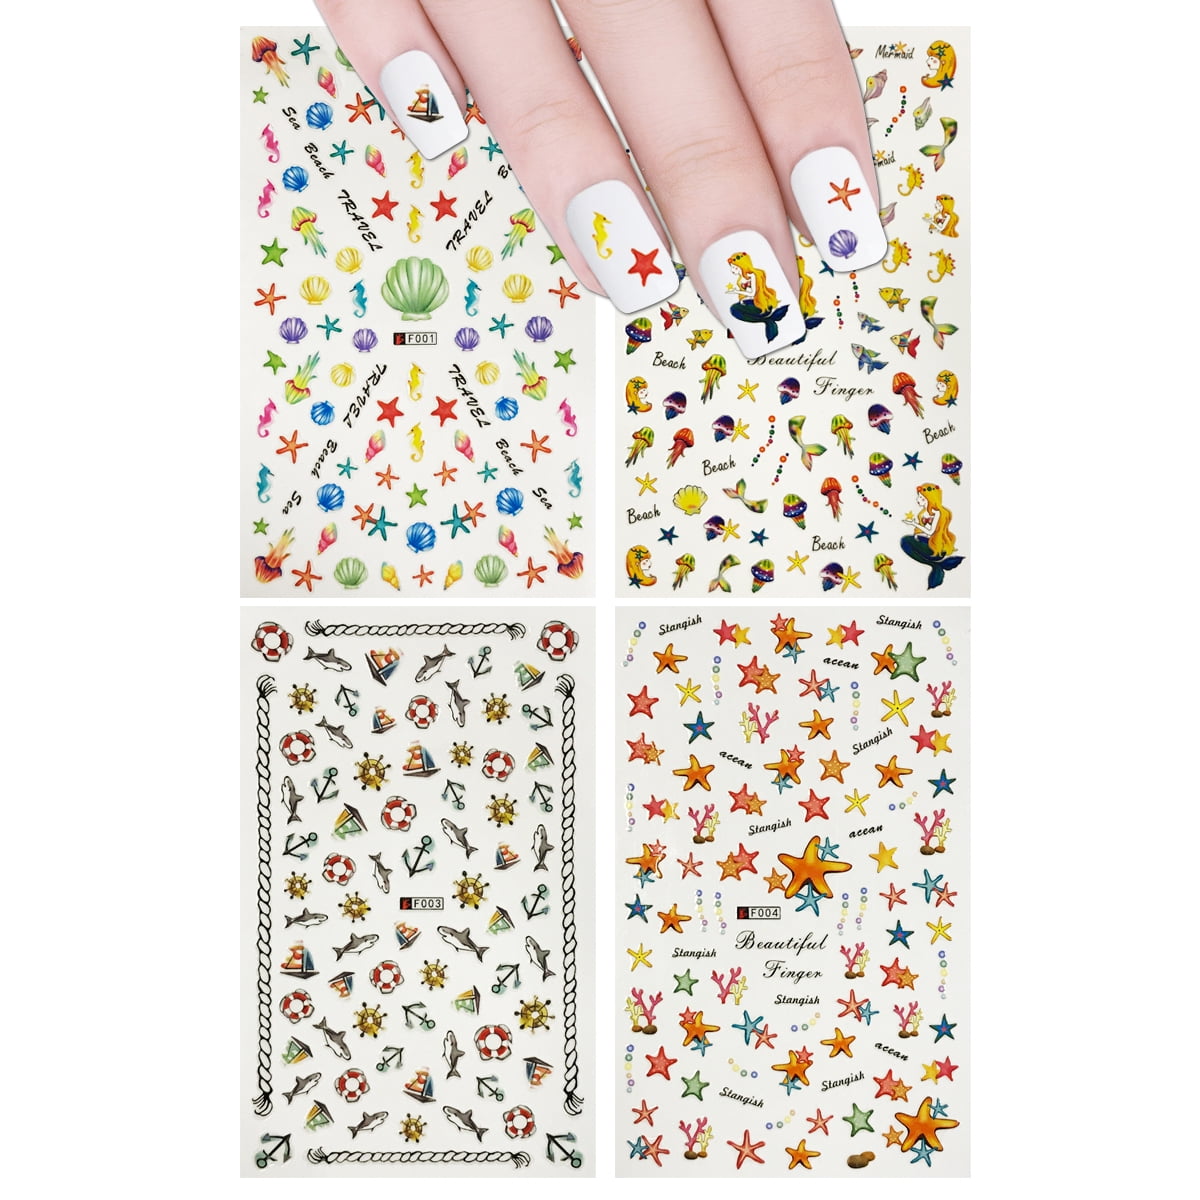 ALLYDREW 4 Sheets Nail Stickers Nail Art Nail Decal Set - Under the Sea ...